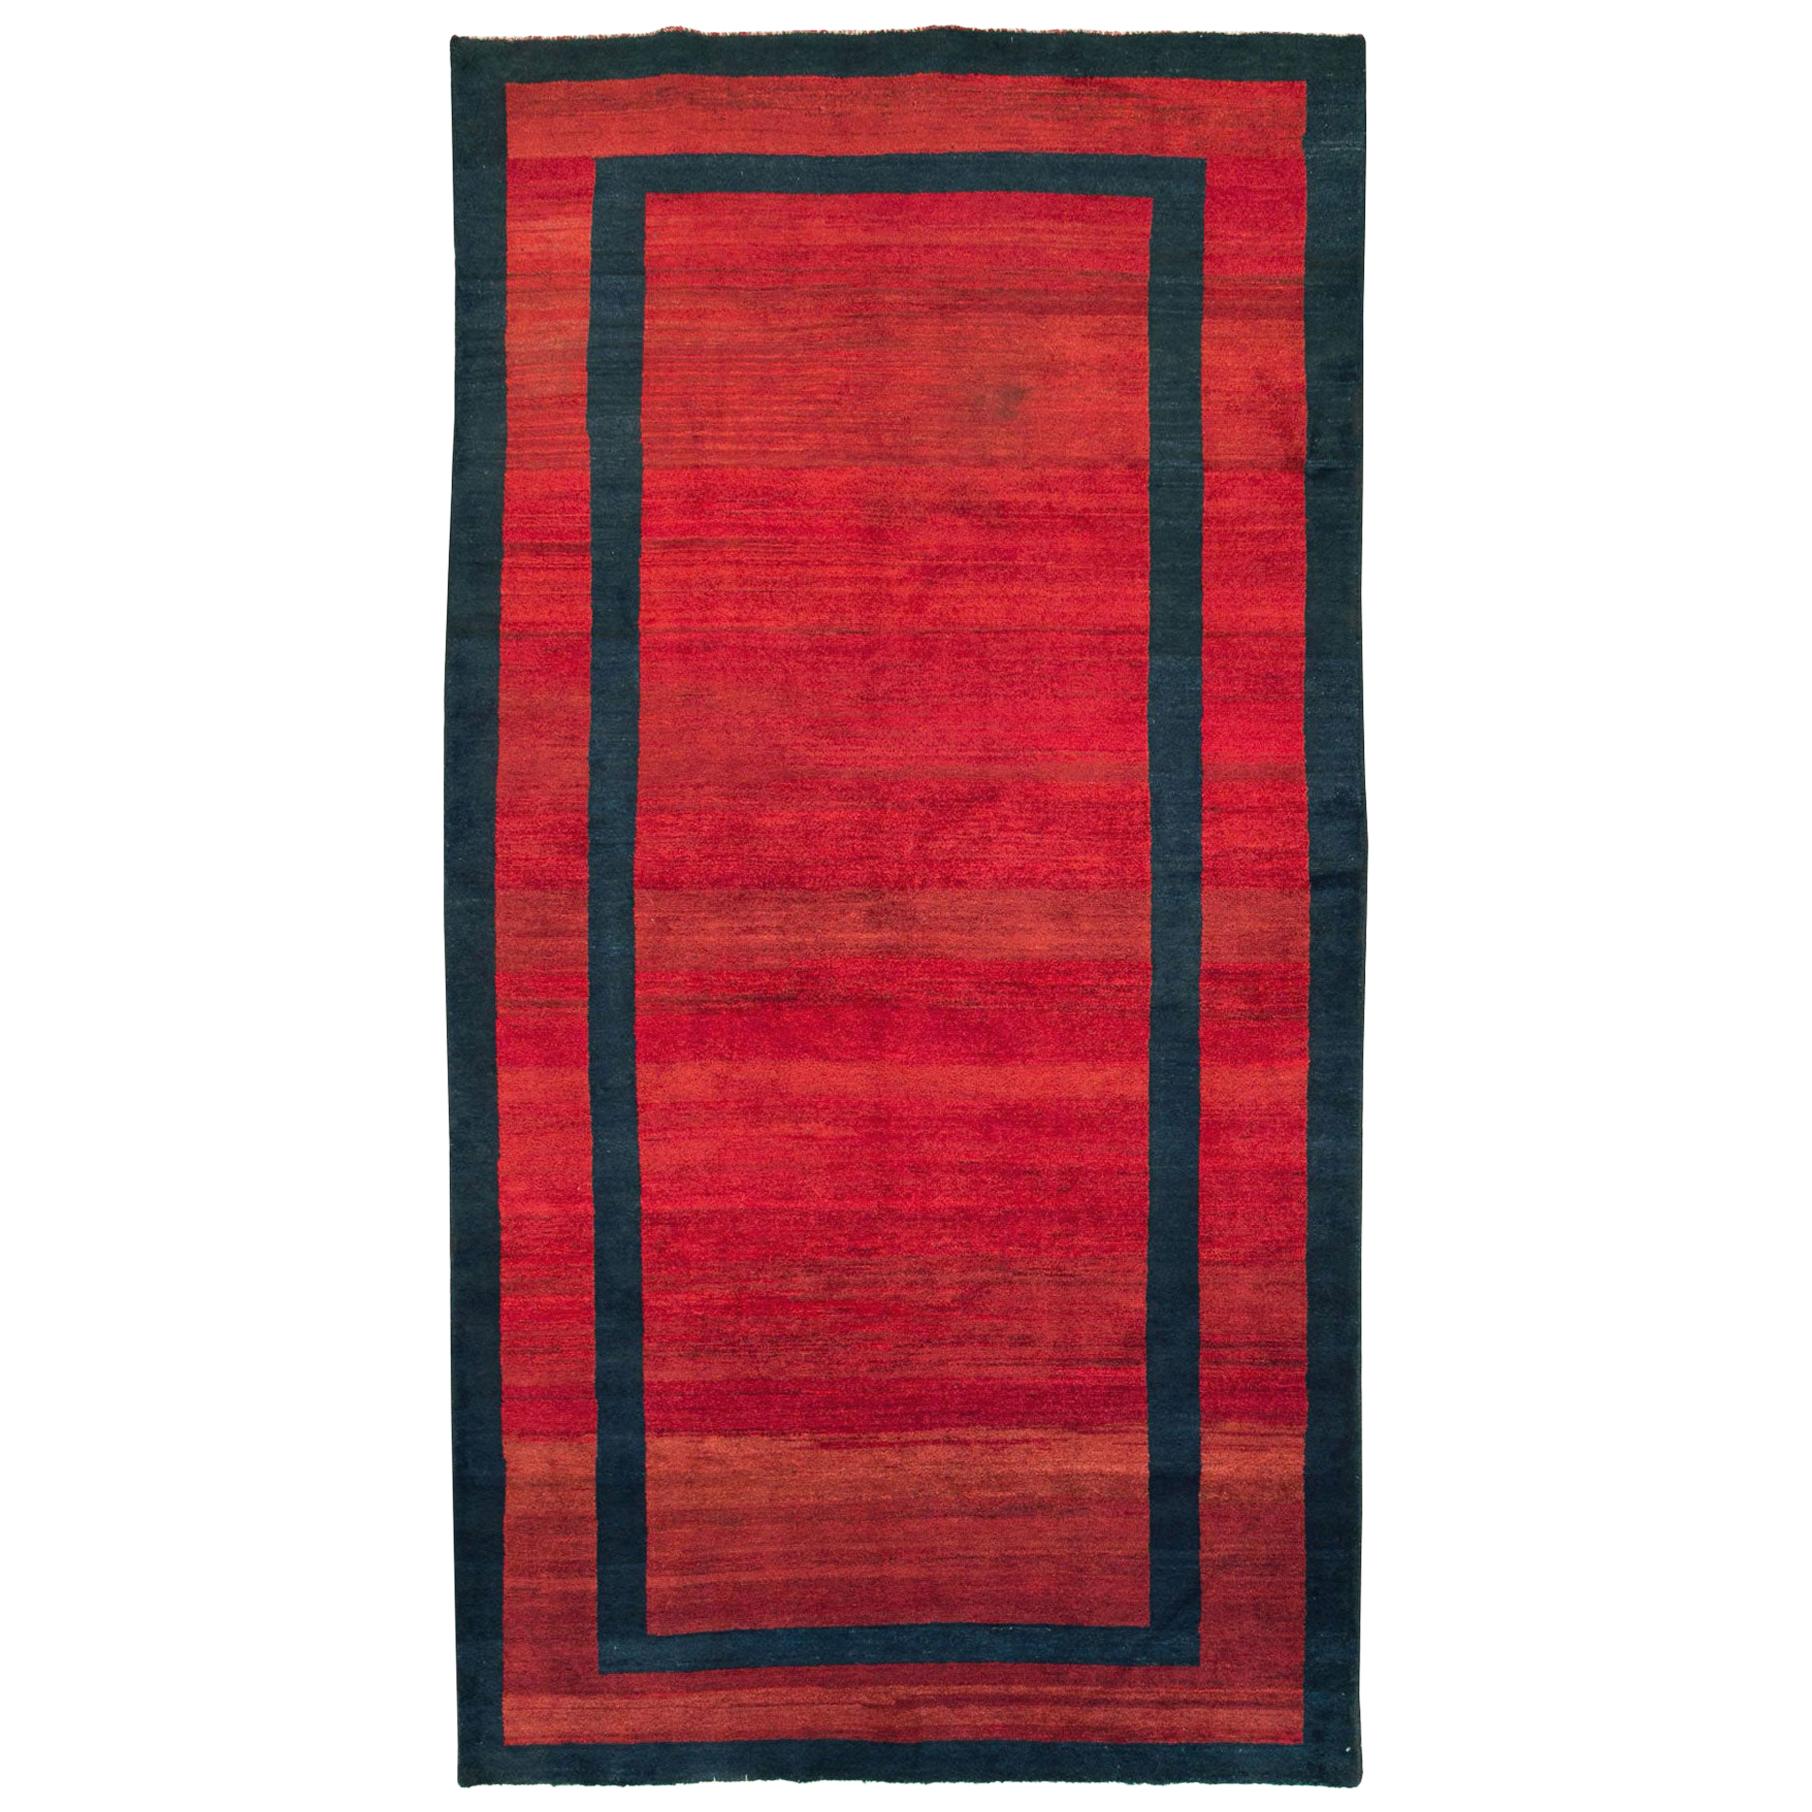 Mid-20th Century Handmade Persian Art Deco Accent Rug in Red